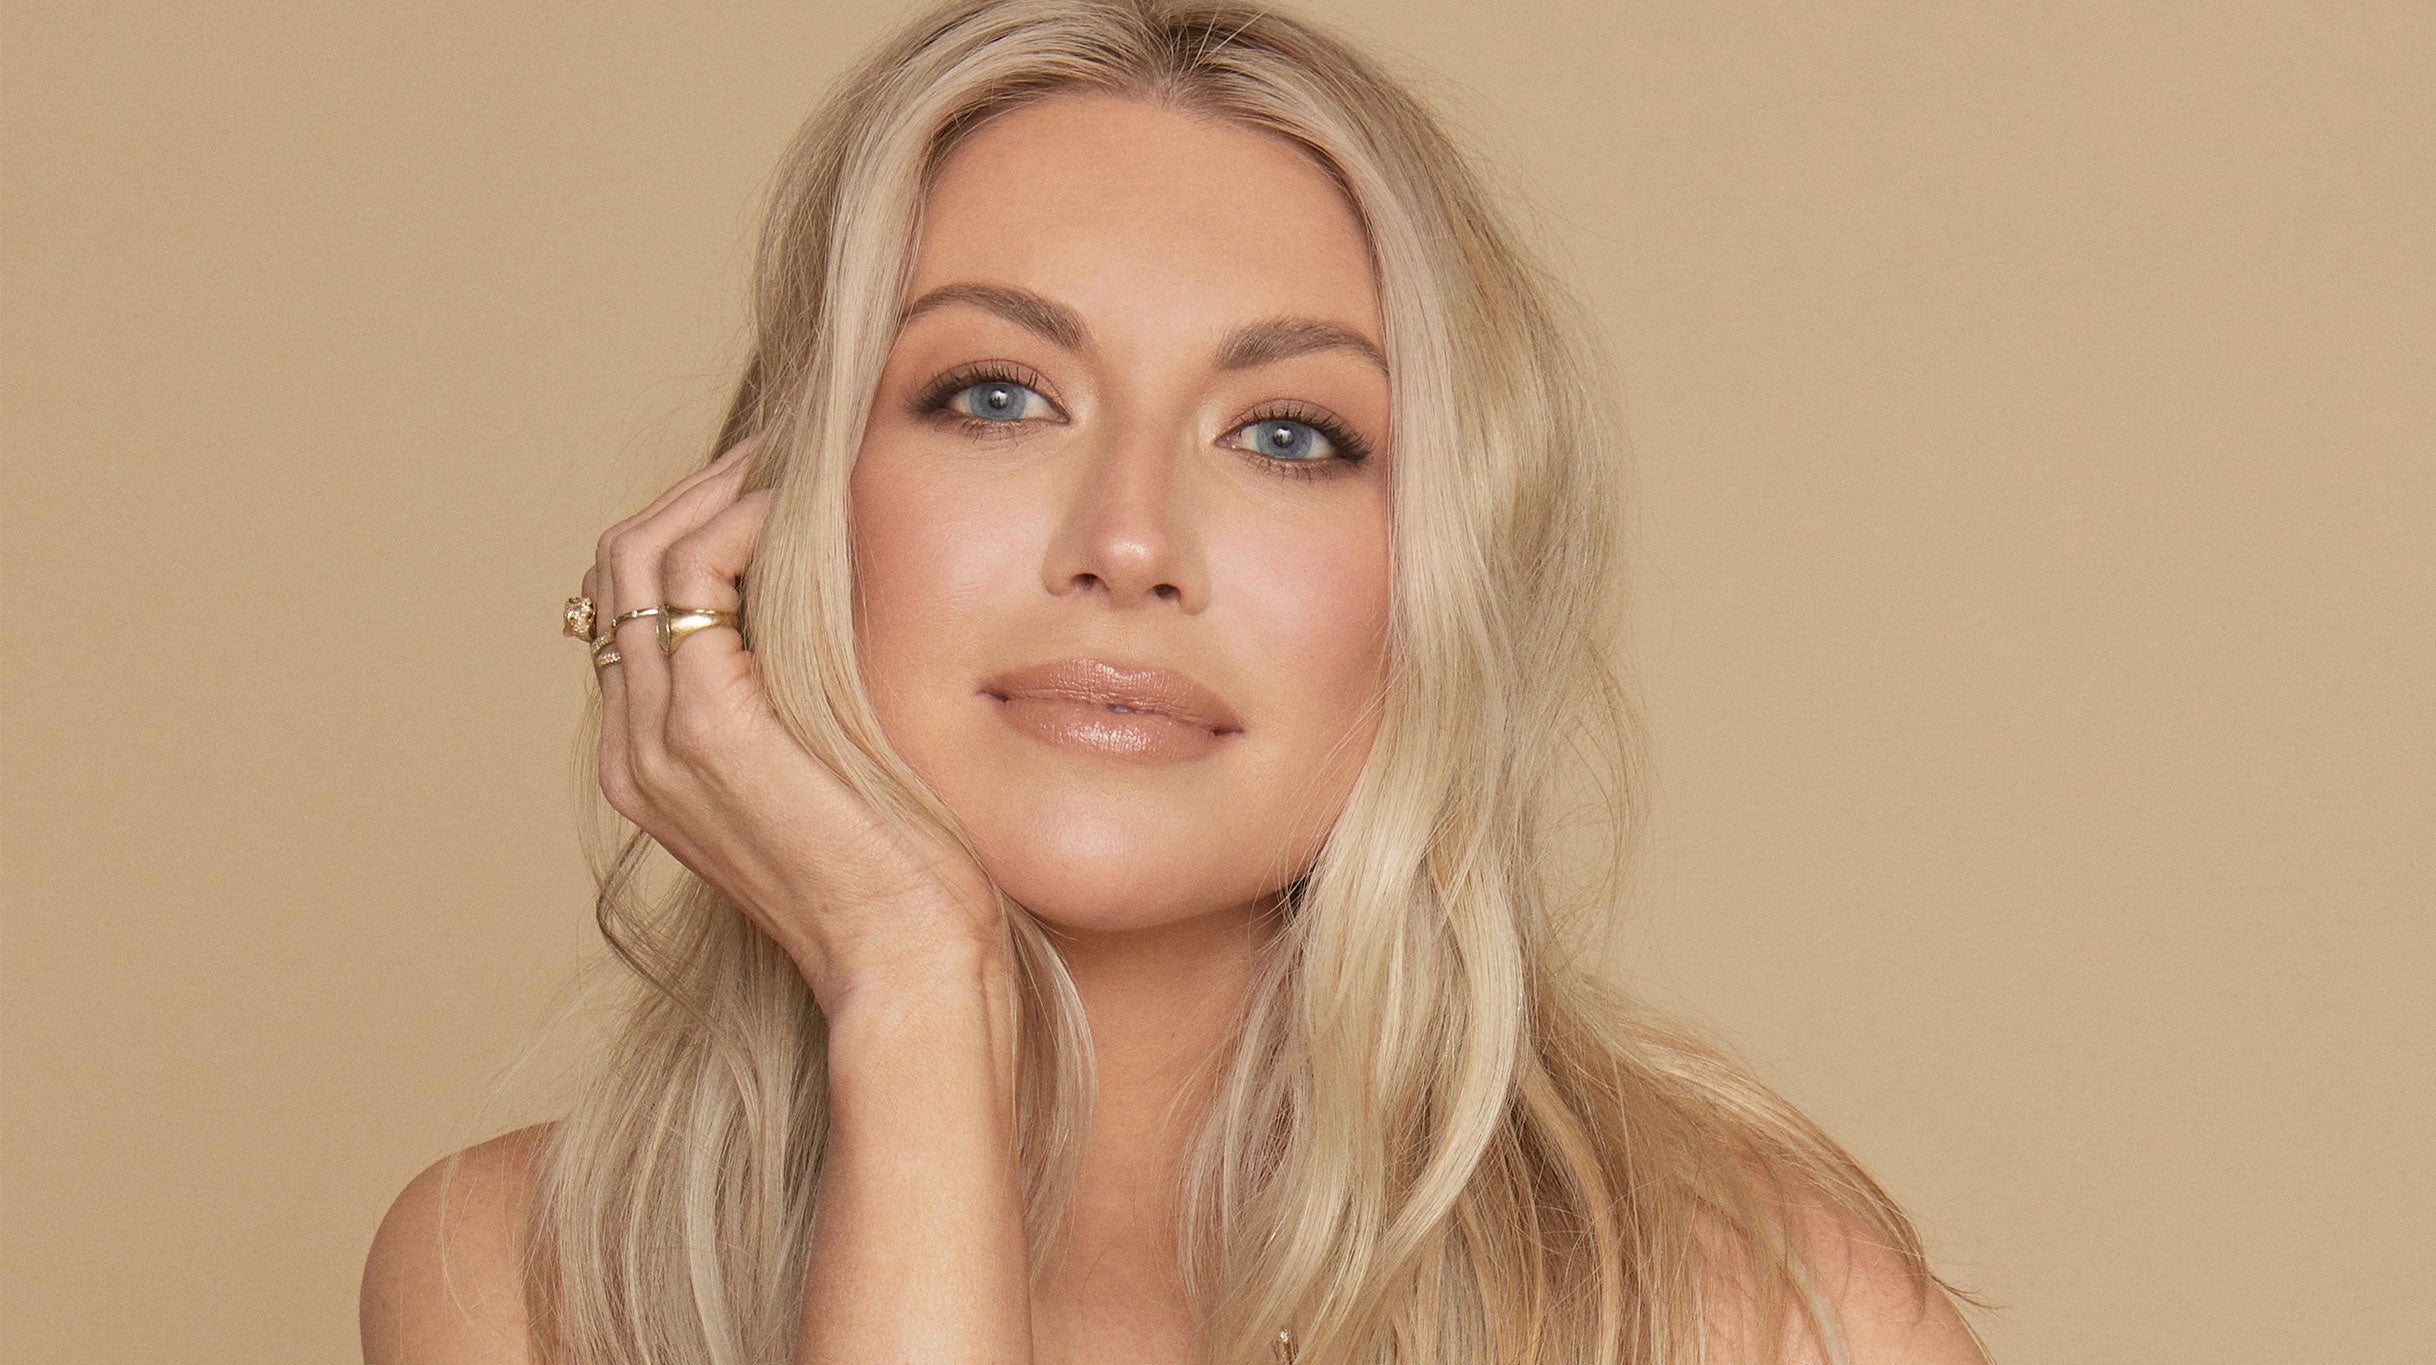 Straight Up With Stassi Live -The Mommy Dearest Tour free presale code